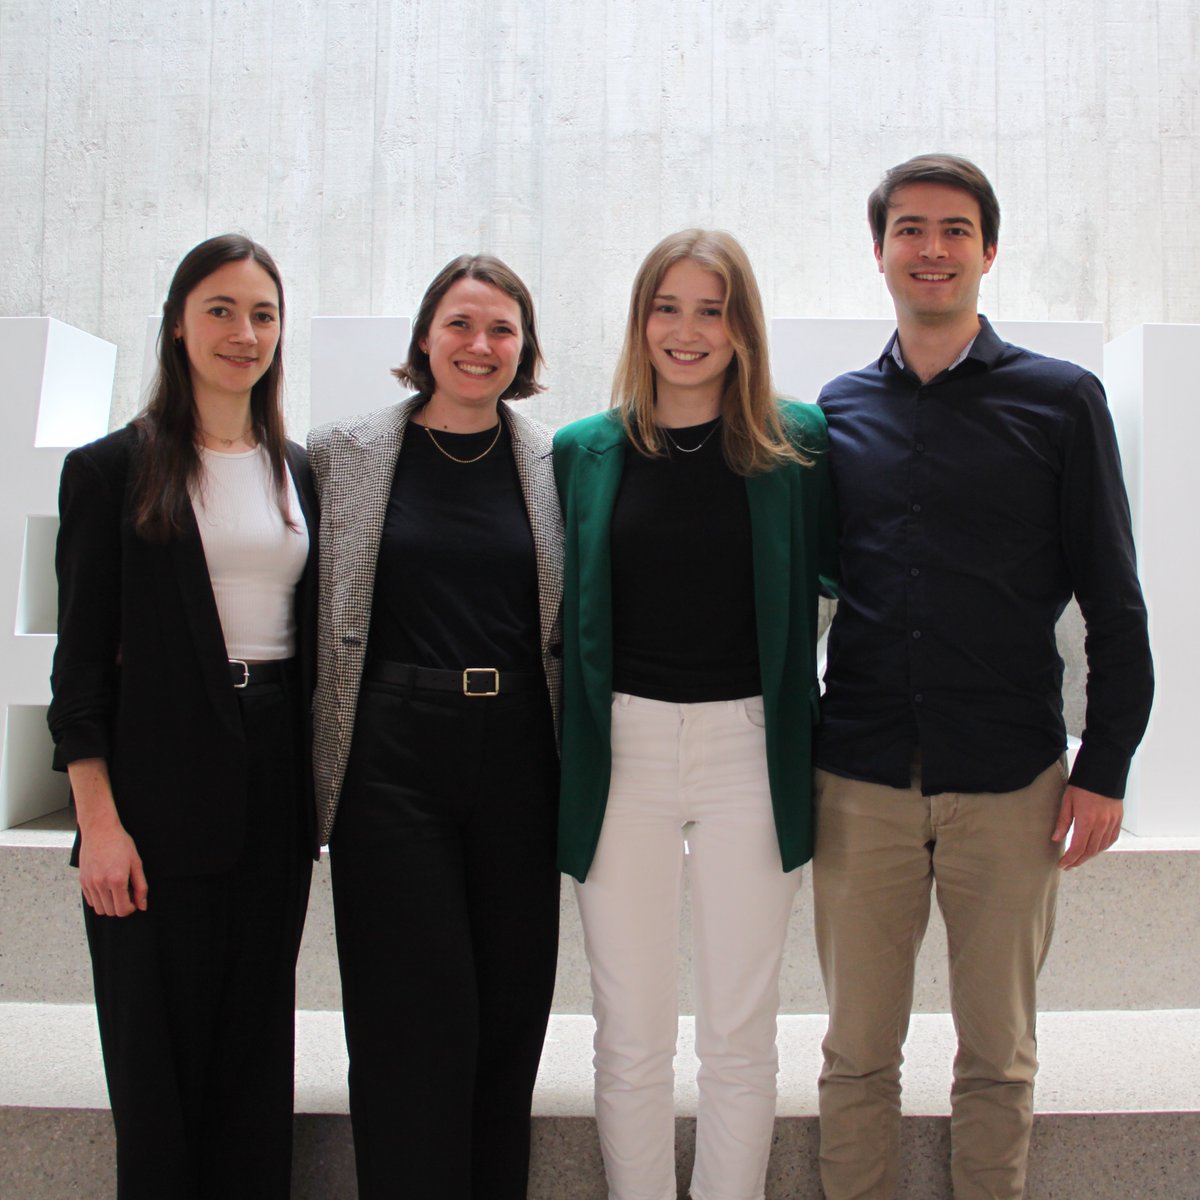 Greetings from the new LSZYSN board!
We are 4 UZH PhD students: Adela, Laura, Melanie and Nicola. We are very excited for our time on the board and would like to thank the network for the trust they‘ve placed in us. 
#TeamIntroductions #Board #LSZYSN #UZH #ETH #ETHZurich